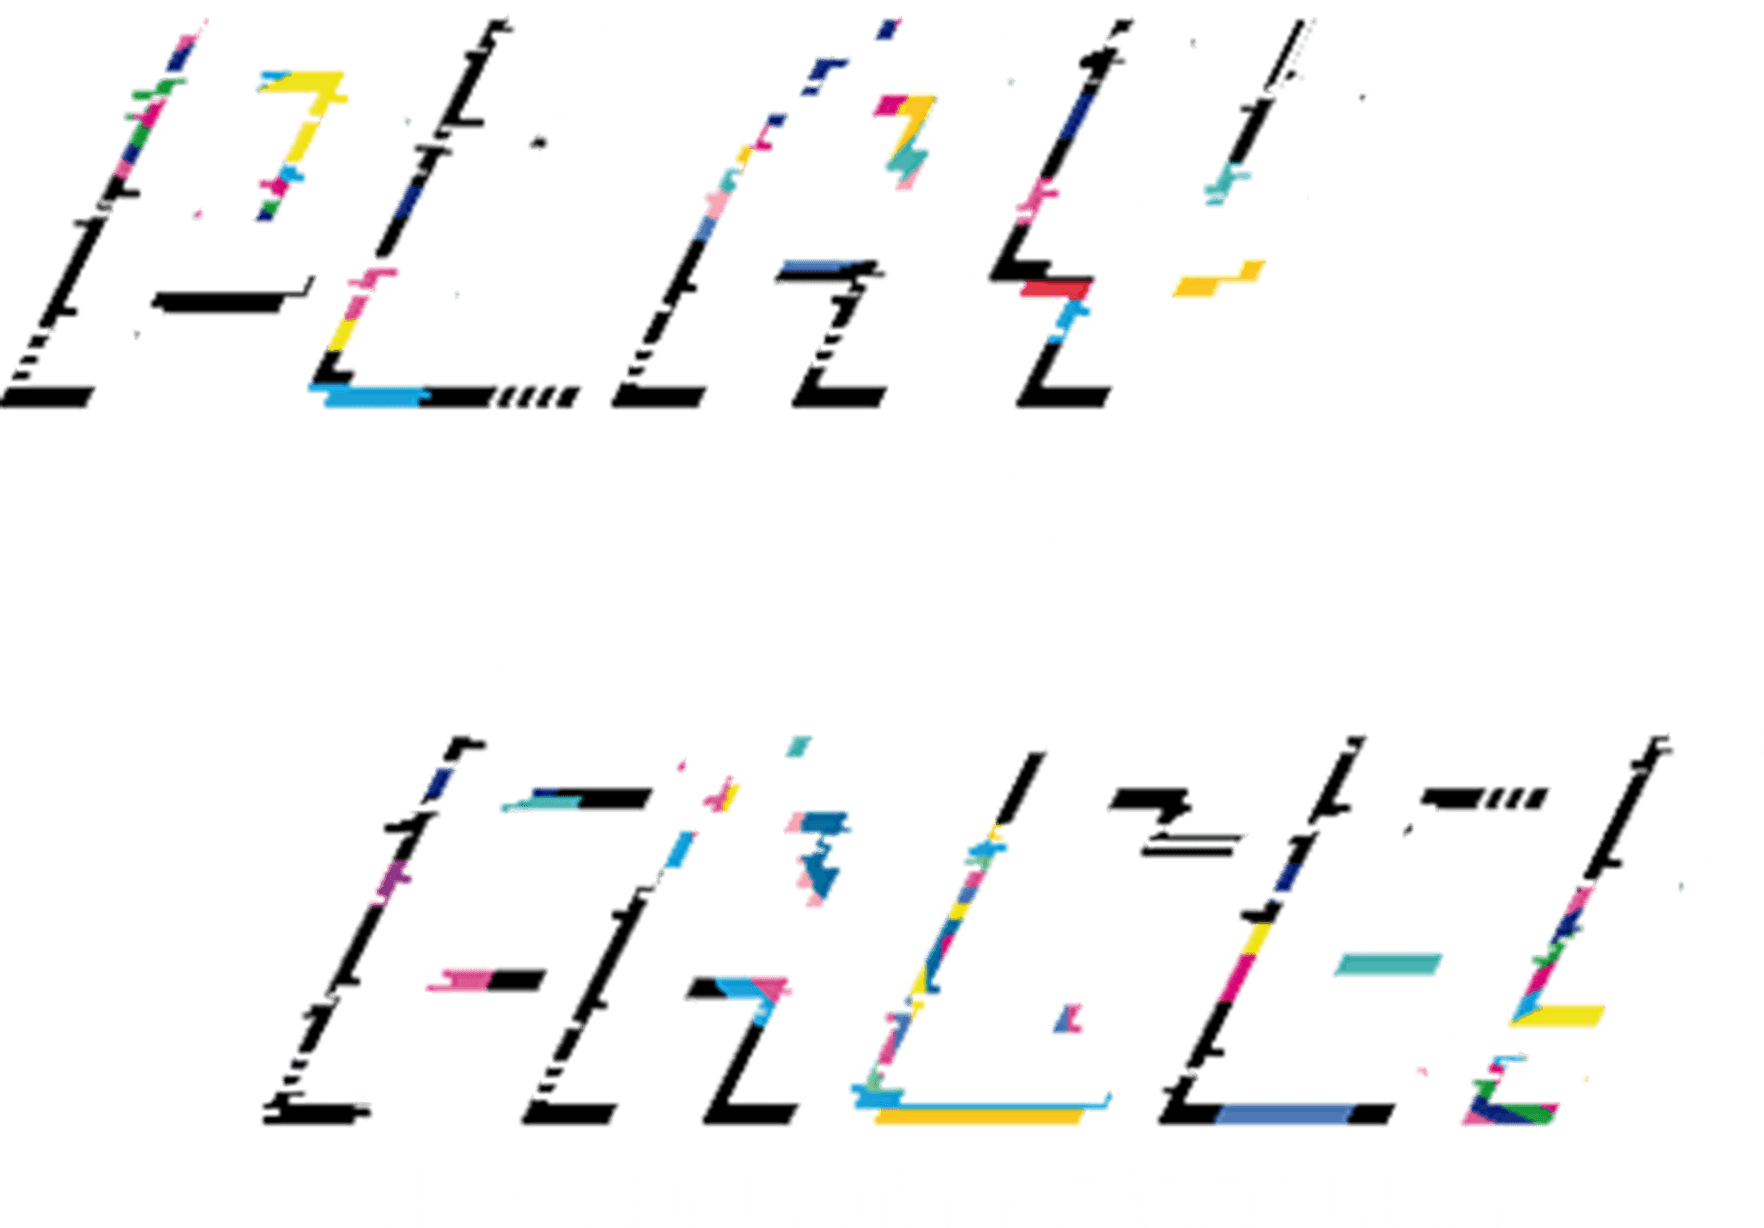 PLAY WITH FACE! PLAYERS MEETS Maison KOSÉ